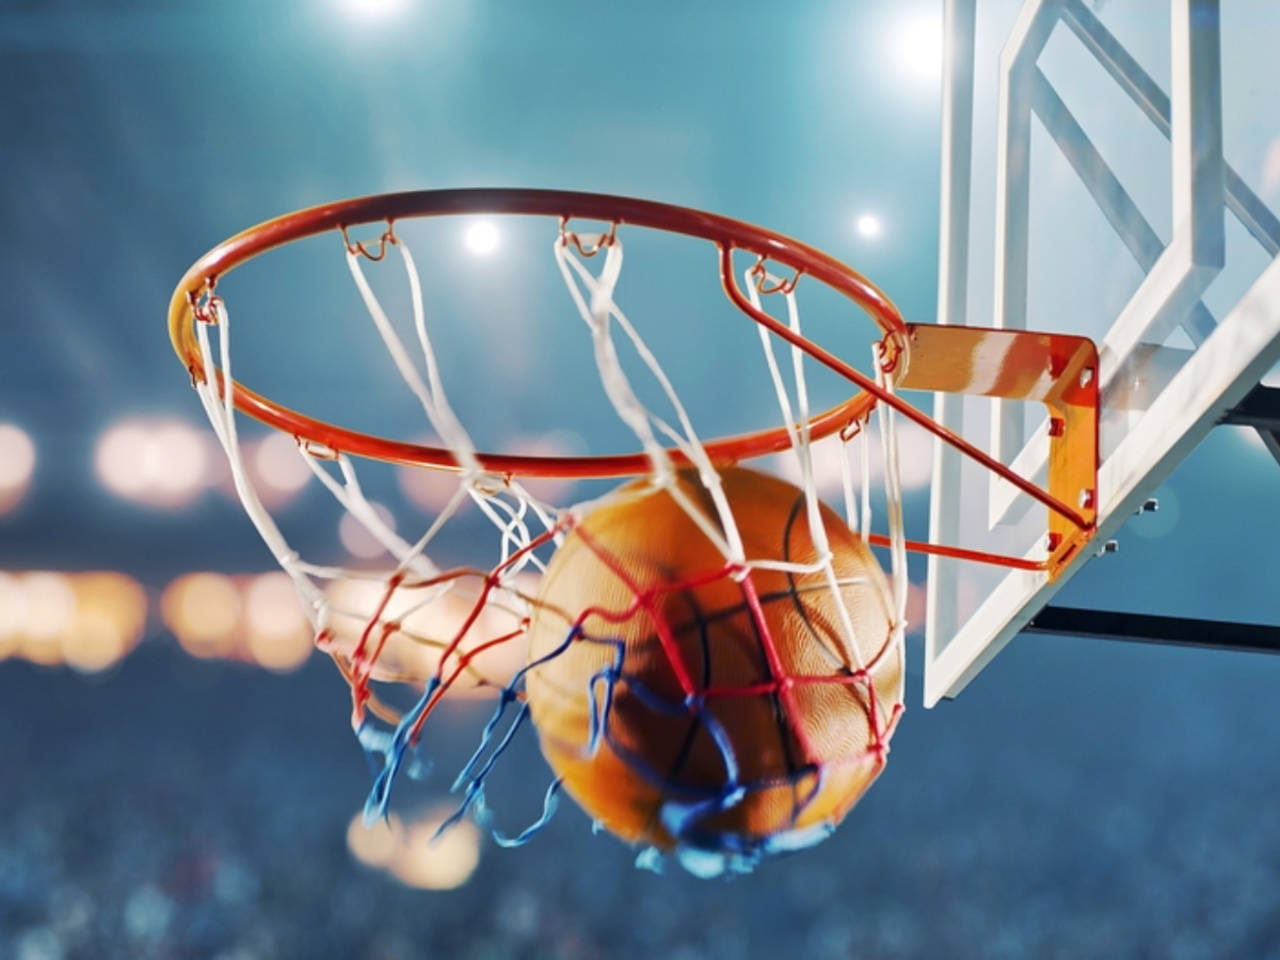 Hoop van land Ik heb het erkend How can you lose weight by playing basketball - Times of India